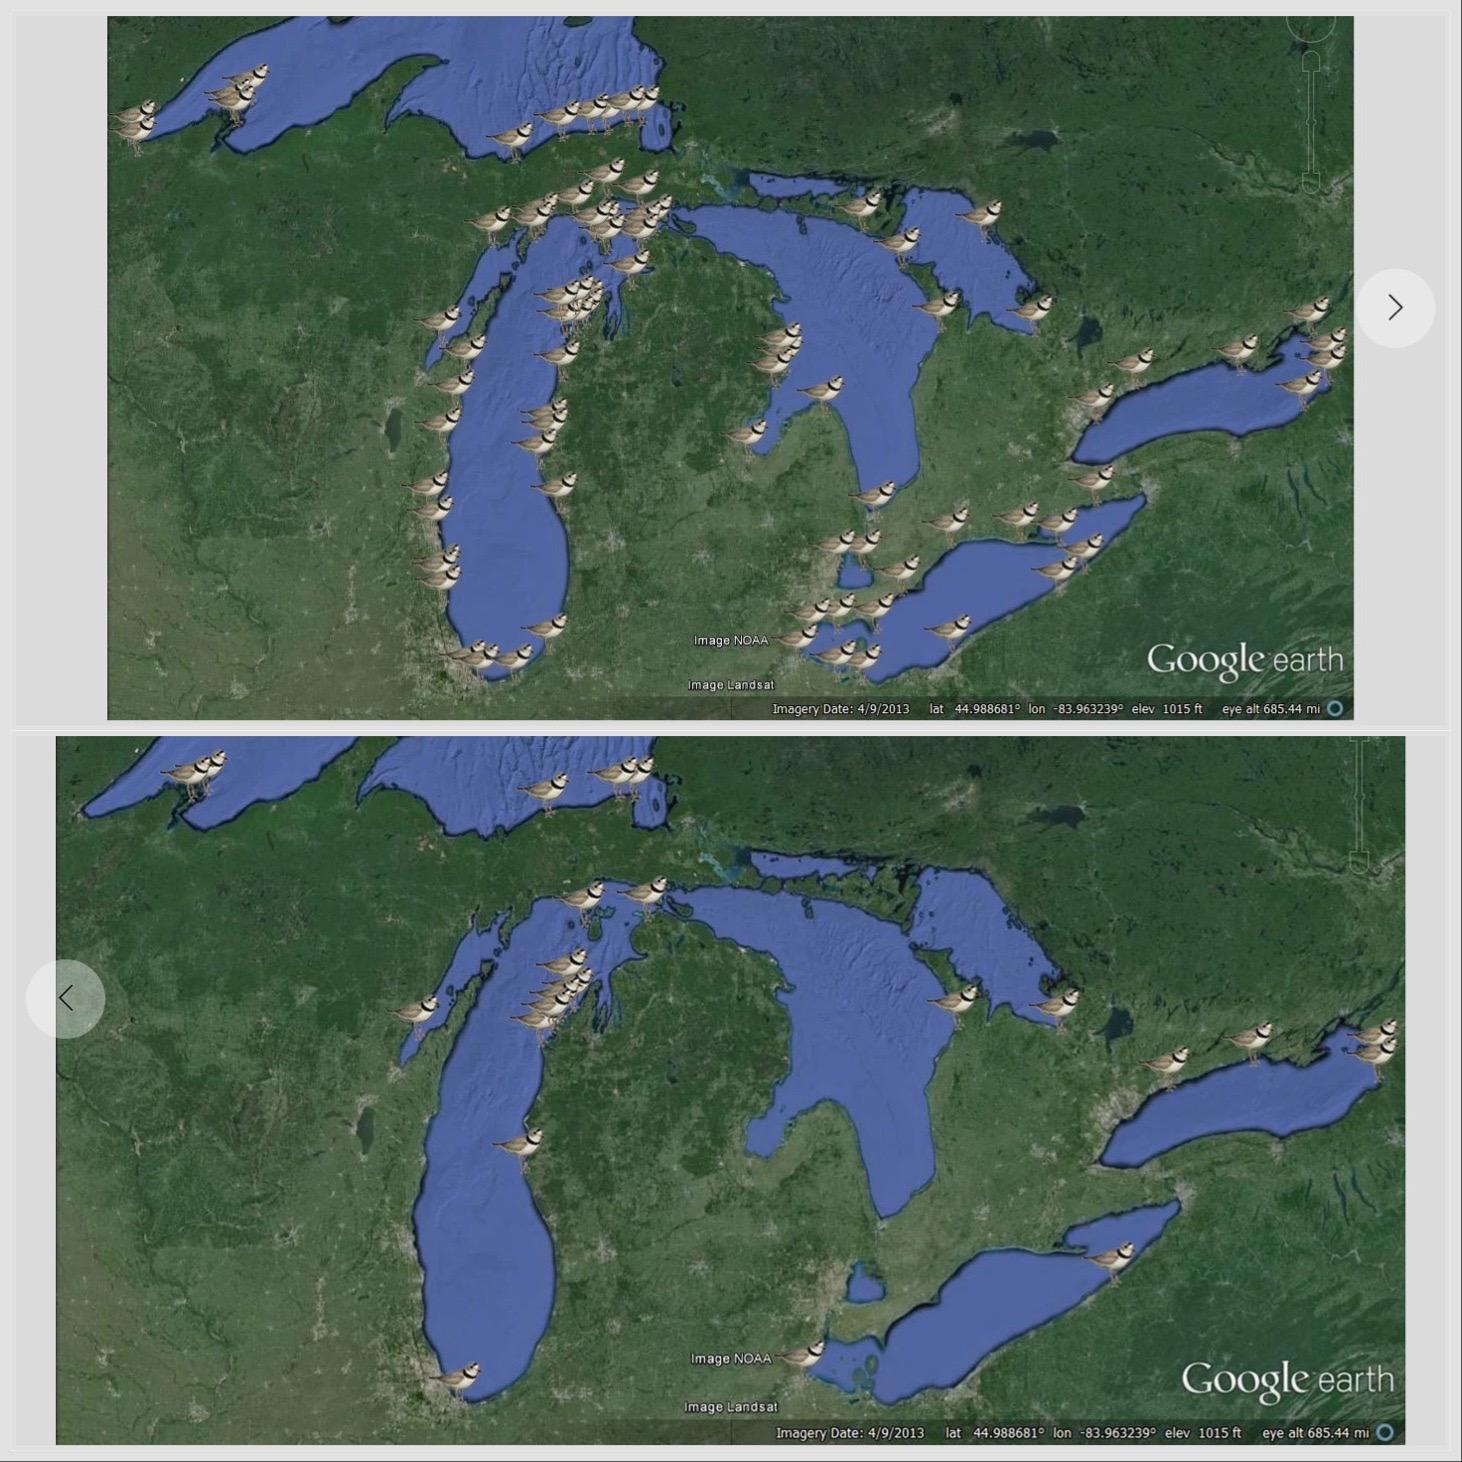 Historic piping plover breeding locations, top; piping plover breeding locations in 2021, bottom. (Courtesy of Great Lakes Piping Plover Recovery Effort)